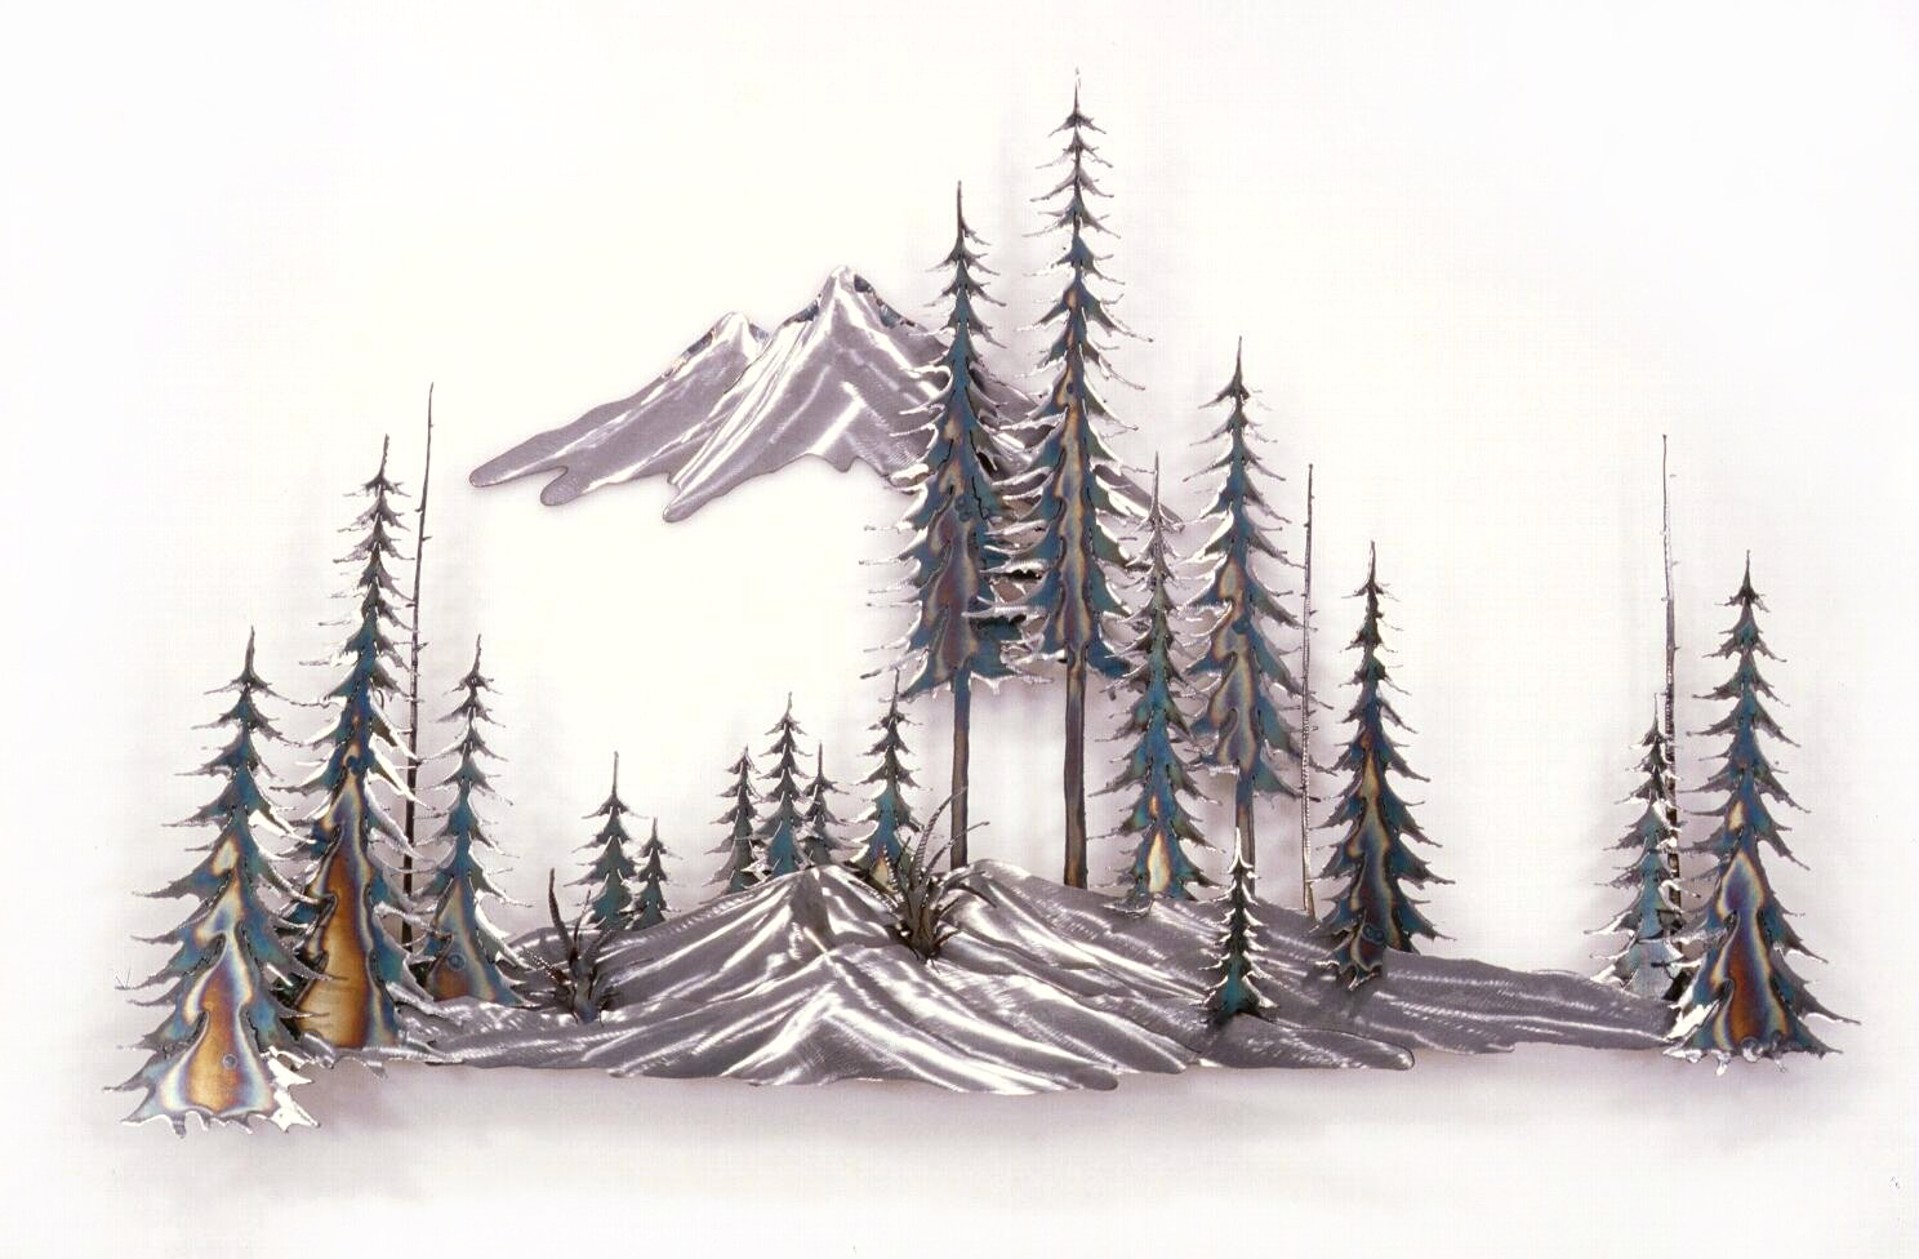 Snow Mountain and Trees by Donnie Wanner